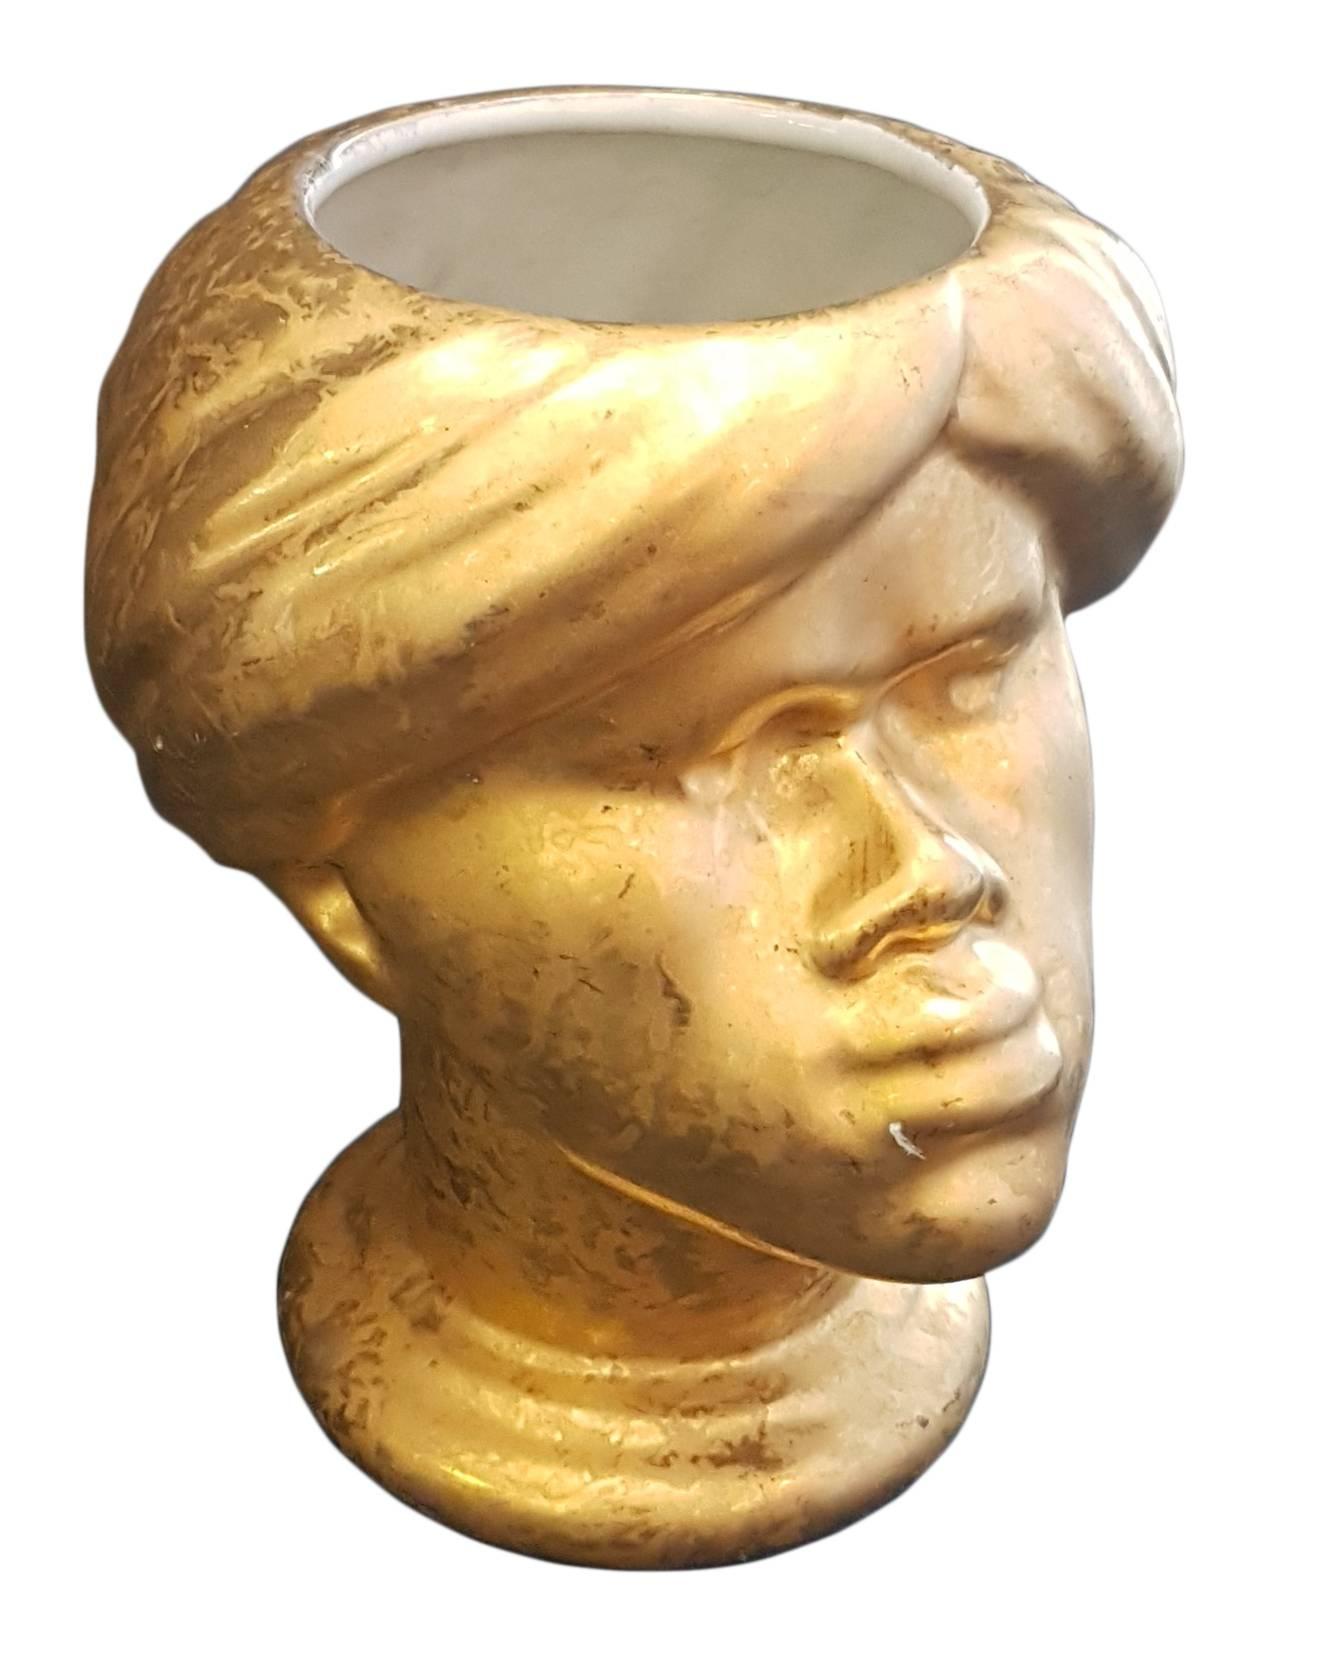 Magnificent enameled gold ceramic vase by Piero Fornasetti (Milan 1913-1988), considered among the most original and creative talents of the 21st century. 
A rare piece depicting the head of a Moor.
Little scratch below the lips.

The item is